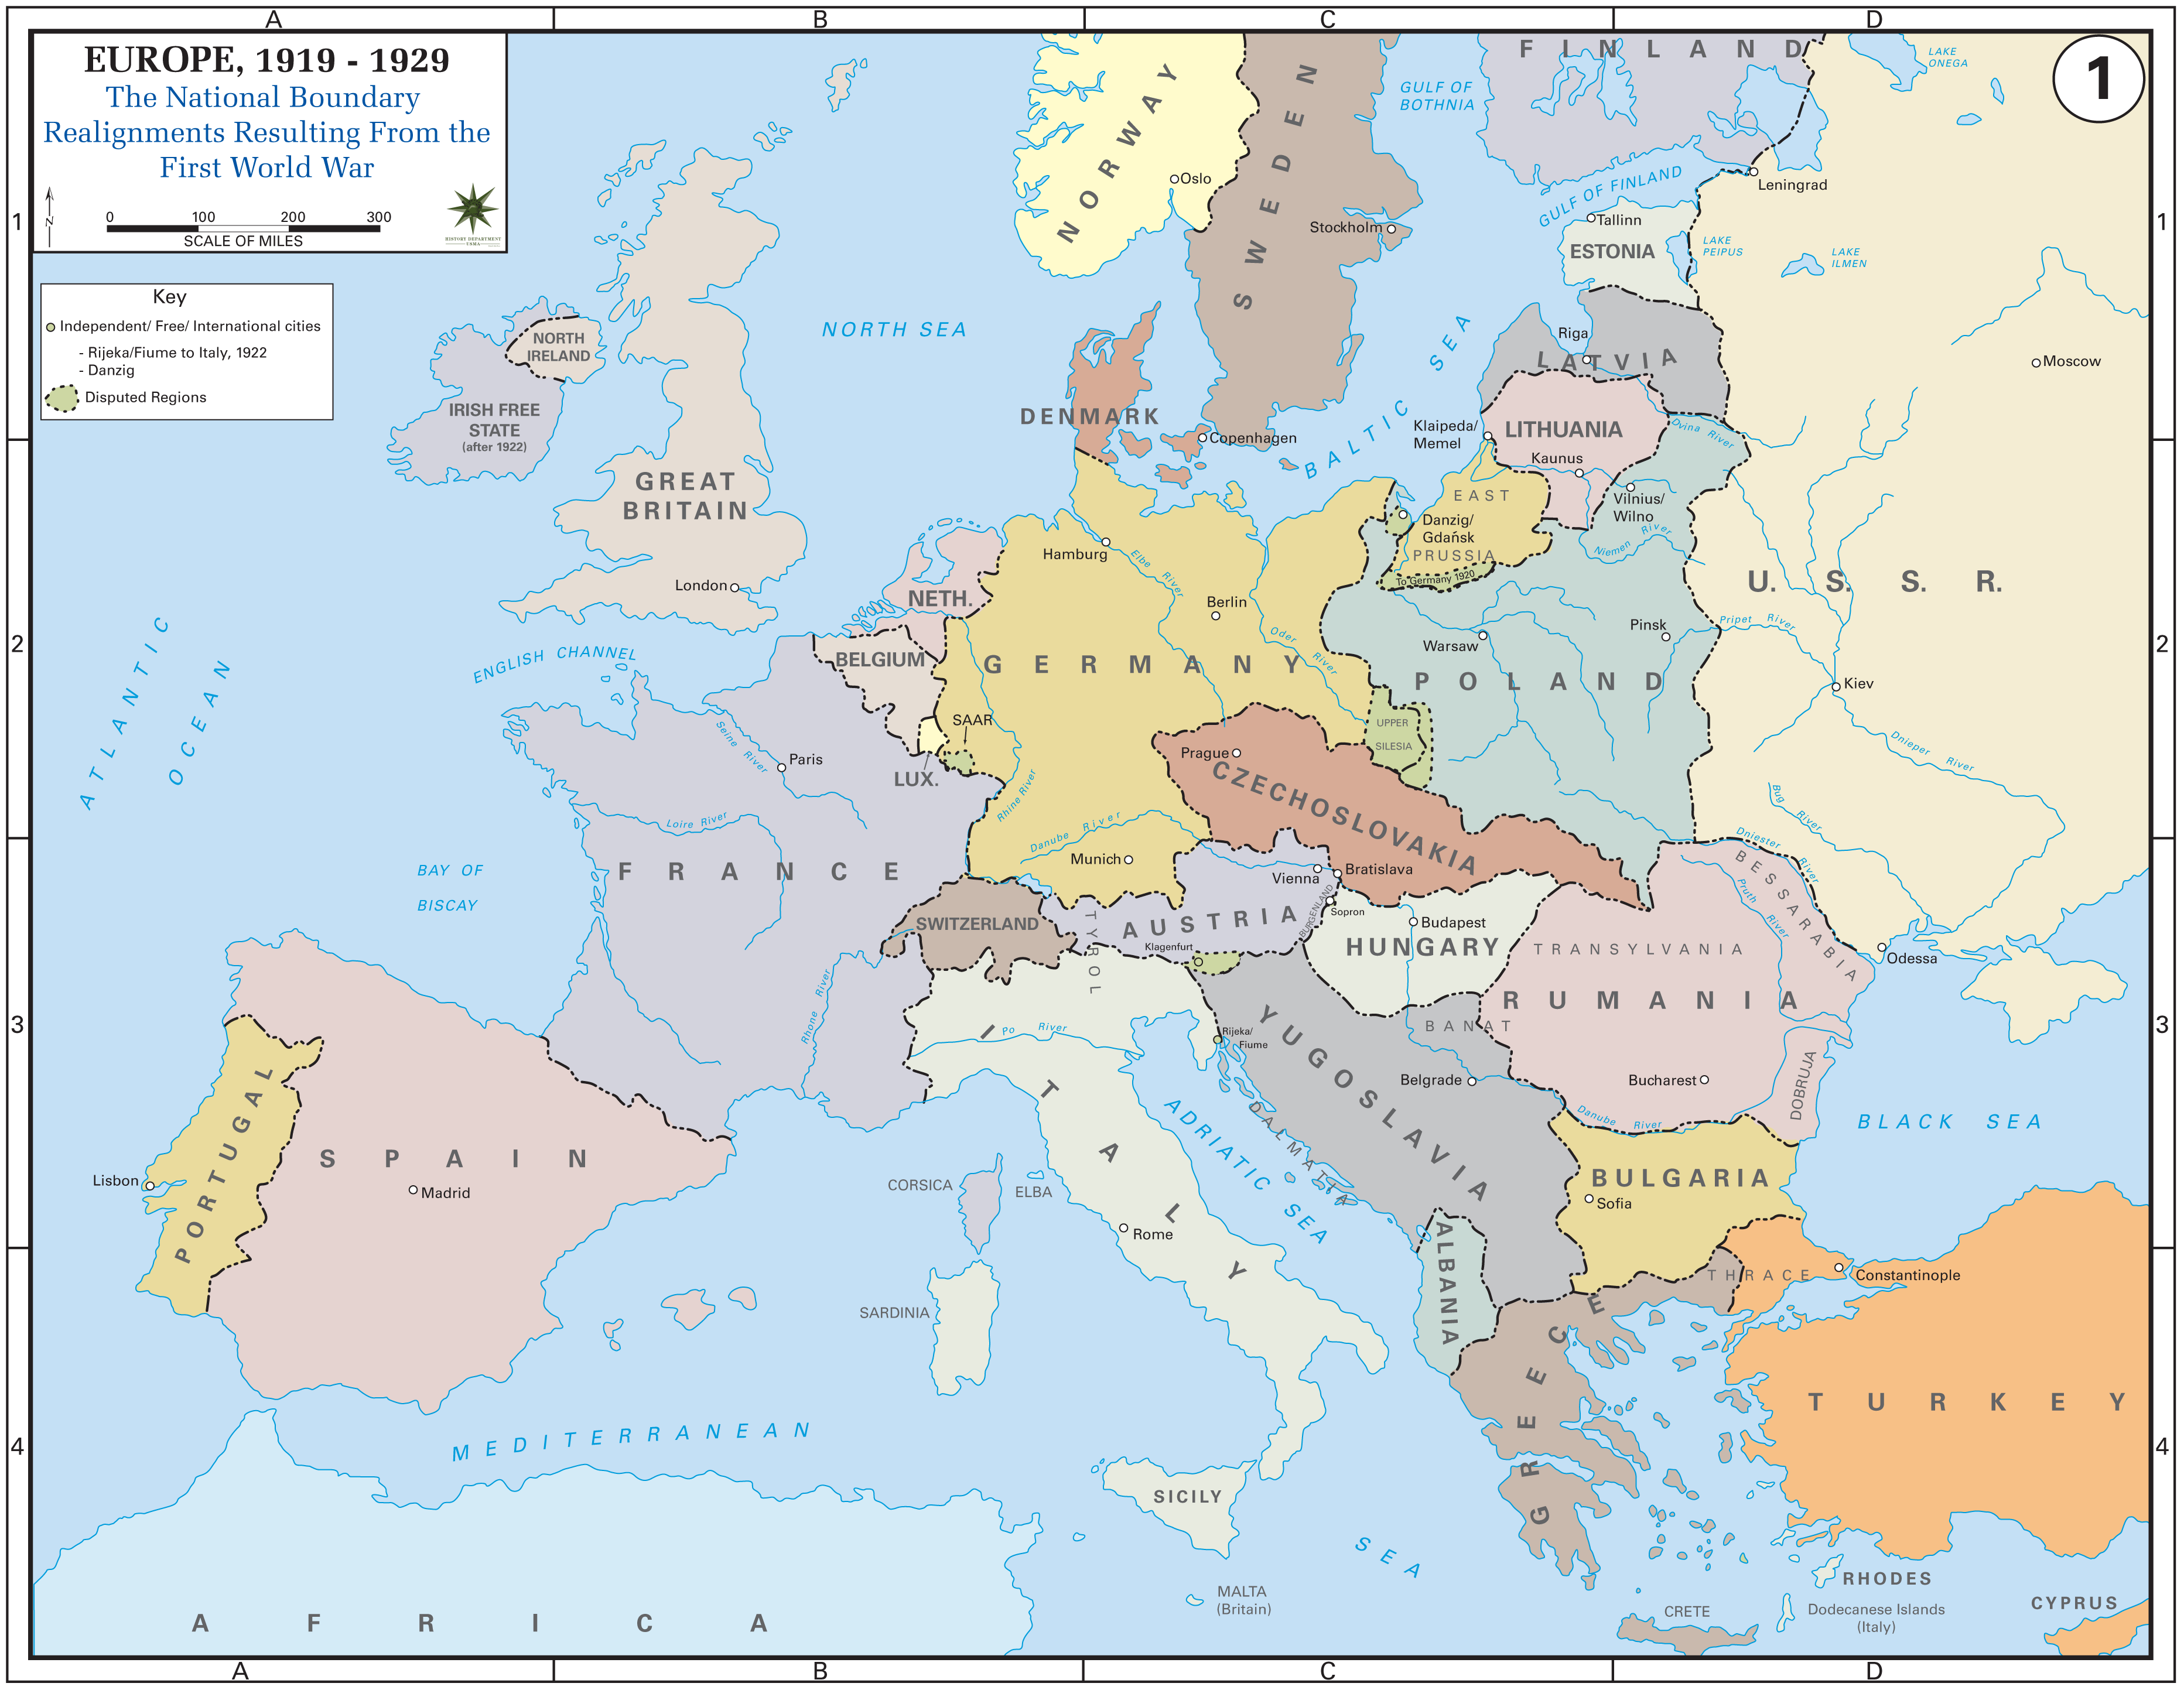 Europe after the Treaty of Versailles, 1919